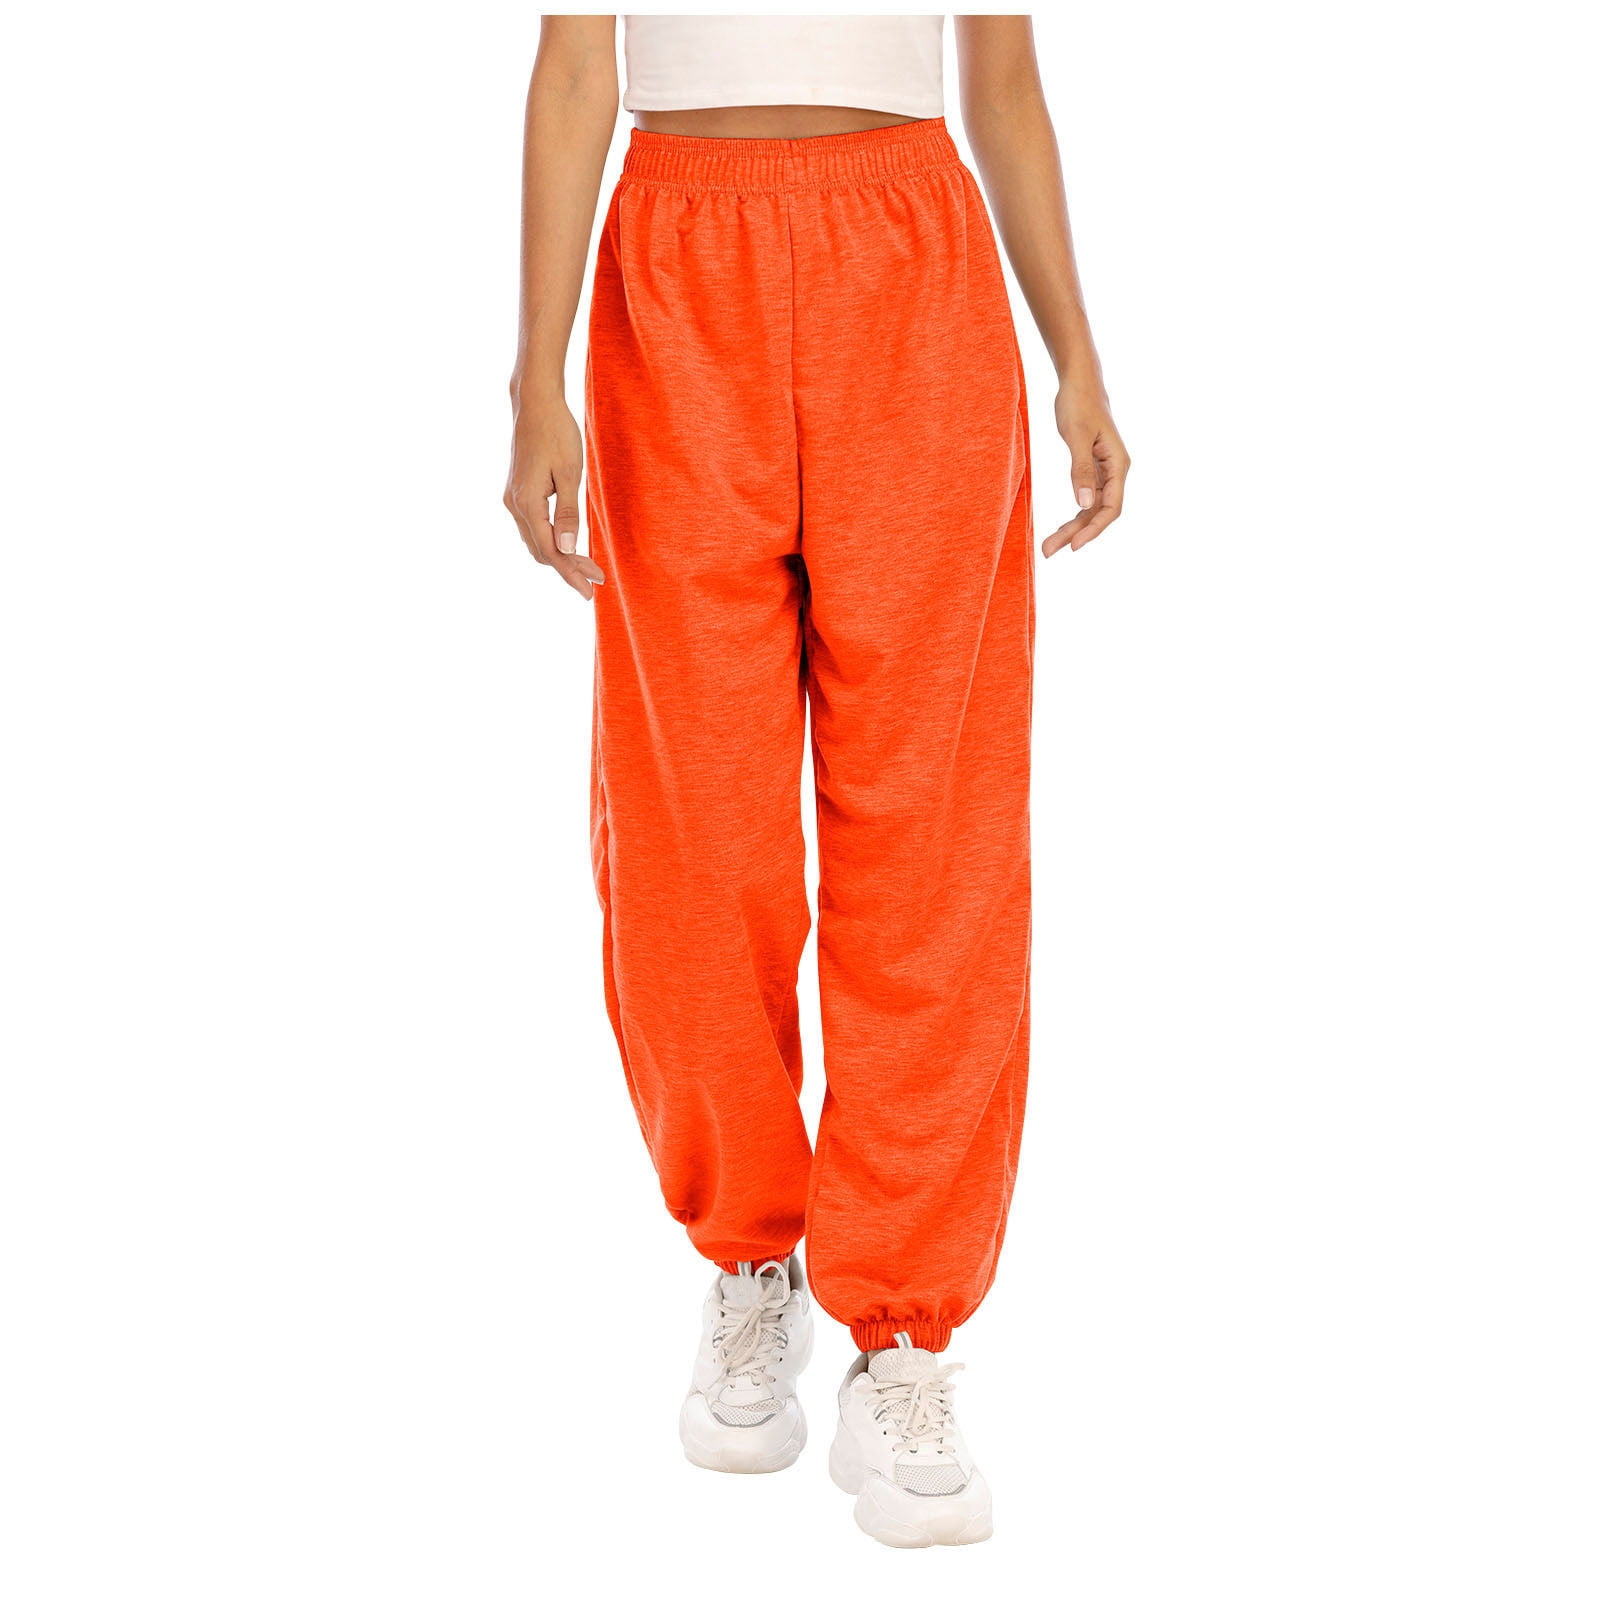 XFLWAM Women’s Casual Baggy Sweatpants High Waisted Running Joggers Pants  Athletic Trousers with Pockets Drawstring Track Pants Orange XXL